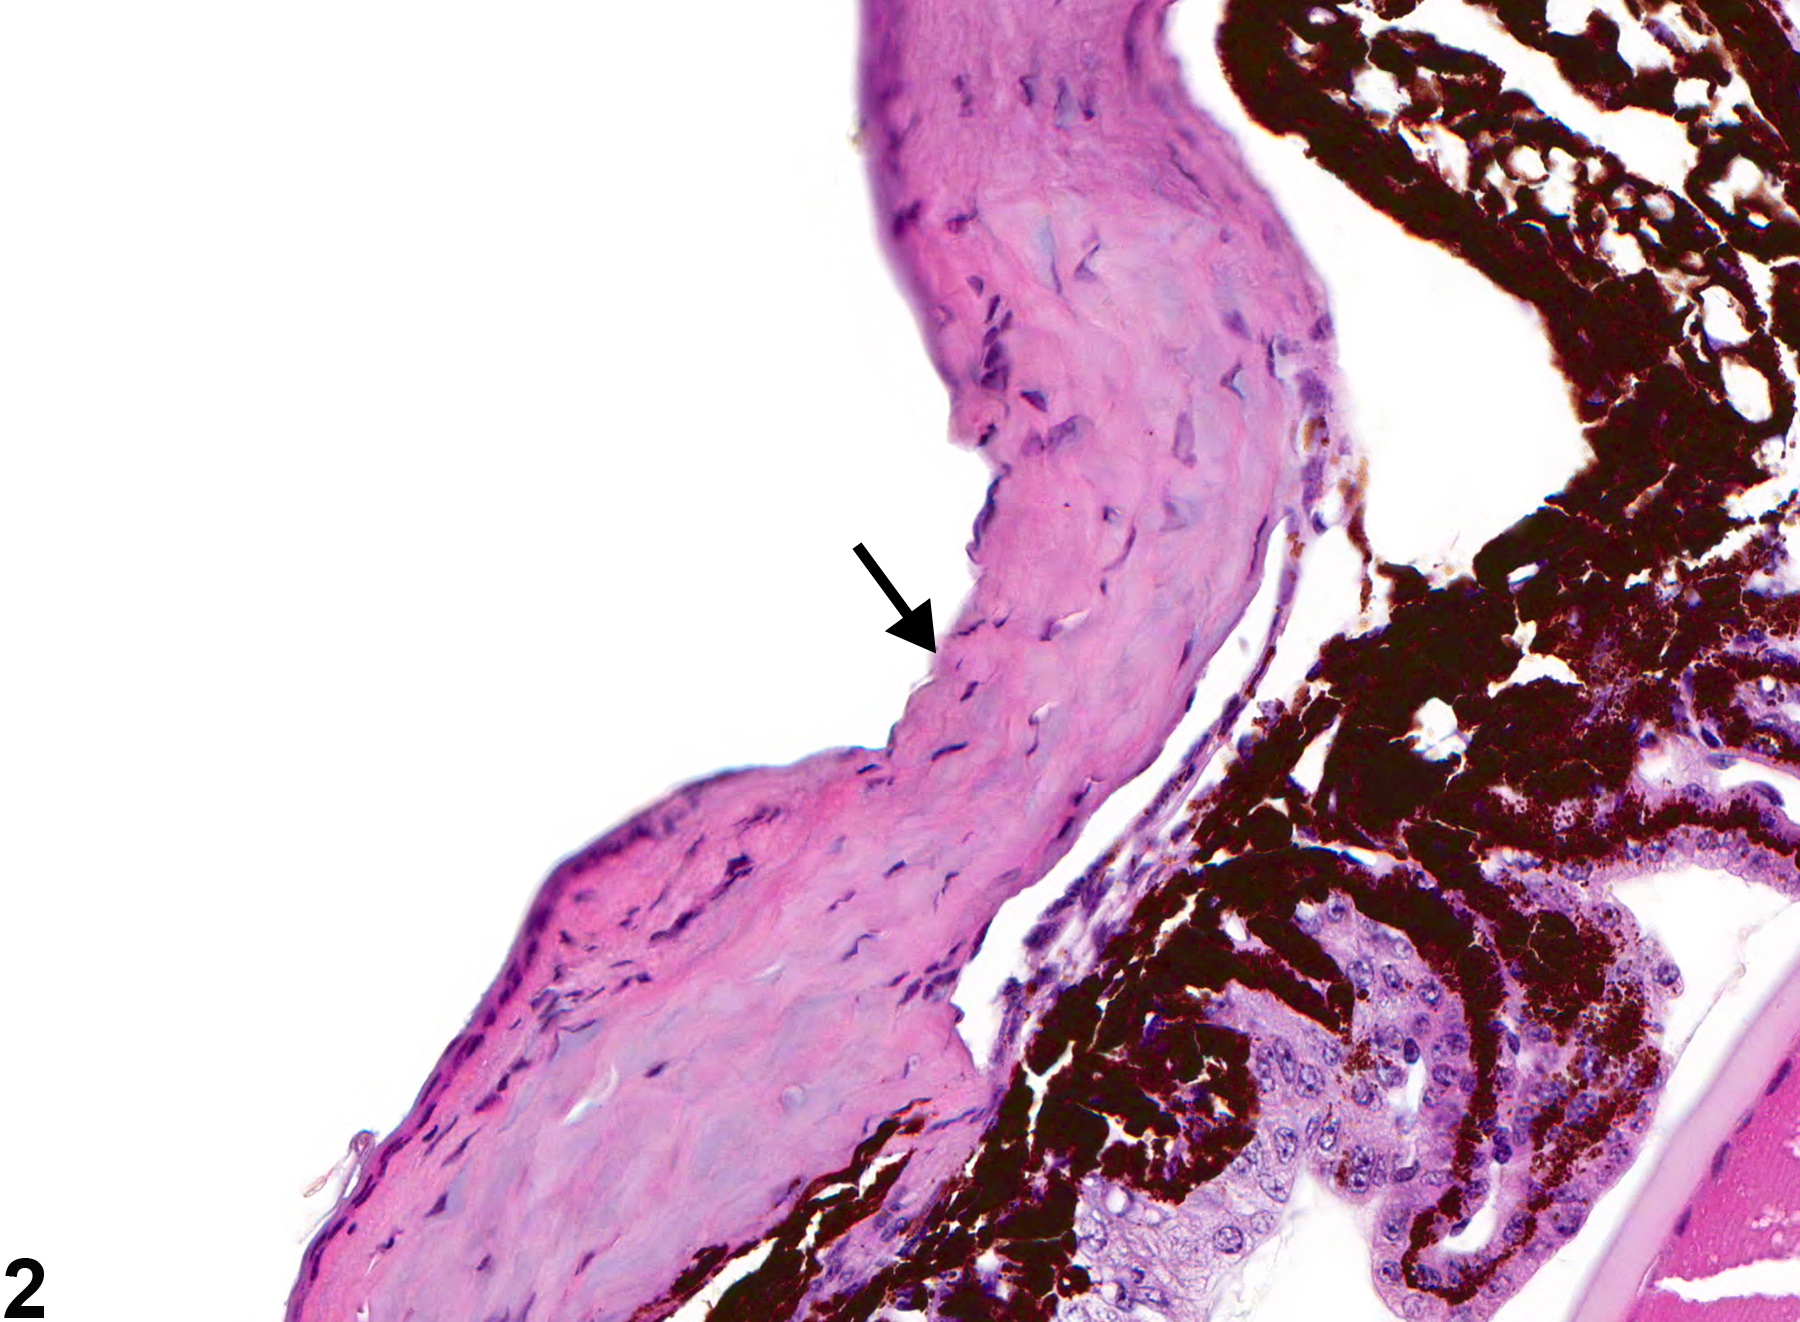 Image of cornea ulcer in the eye from a male B6C3F1 mouse in a subchronic study